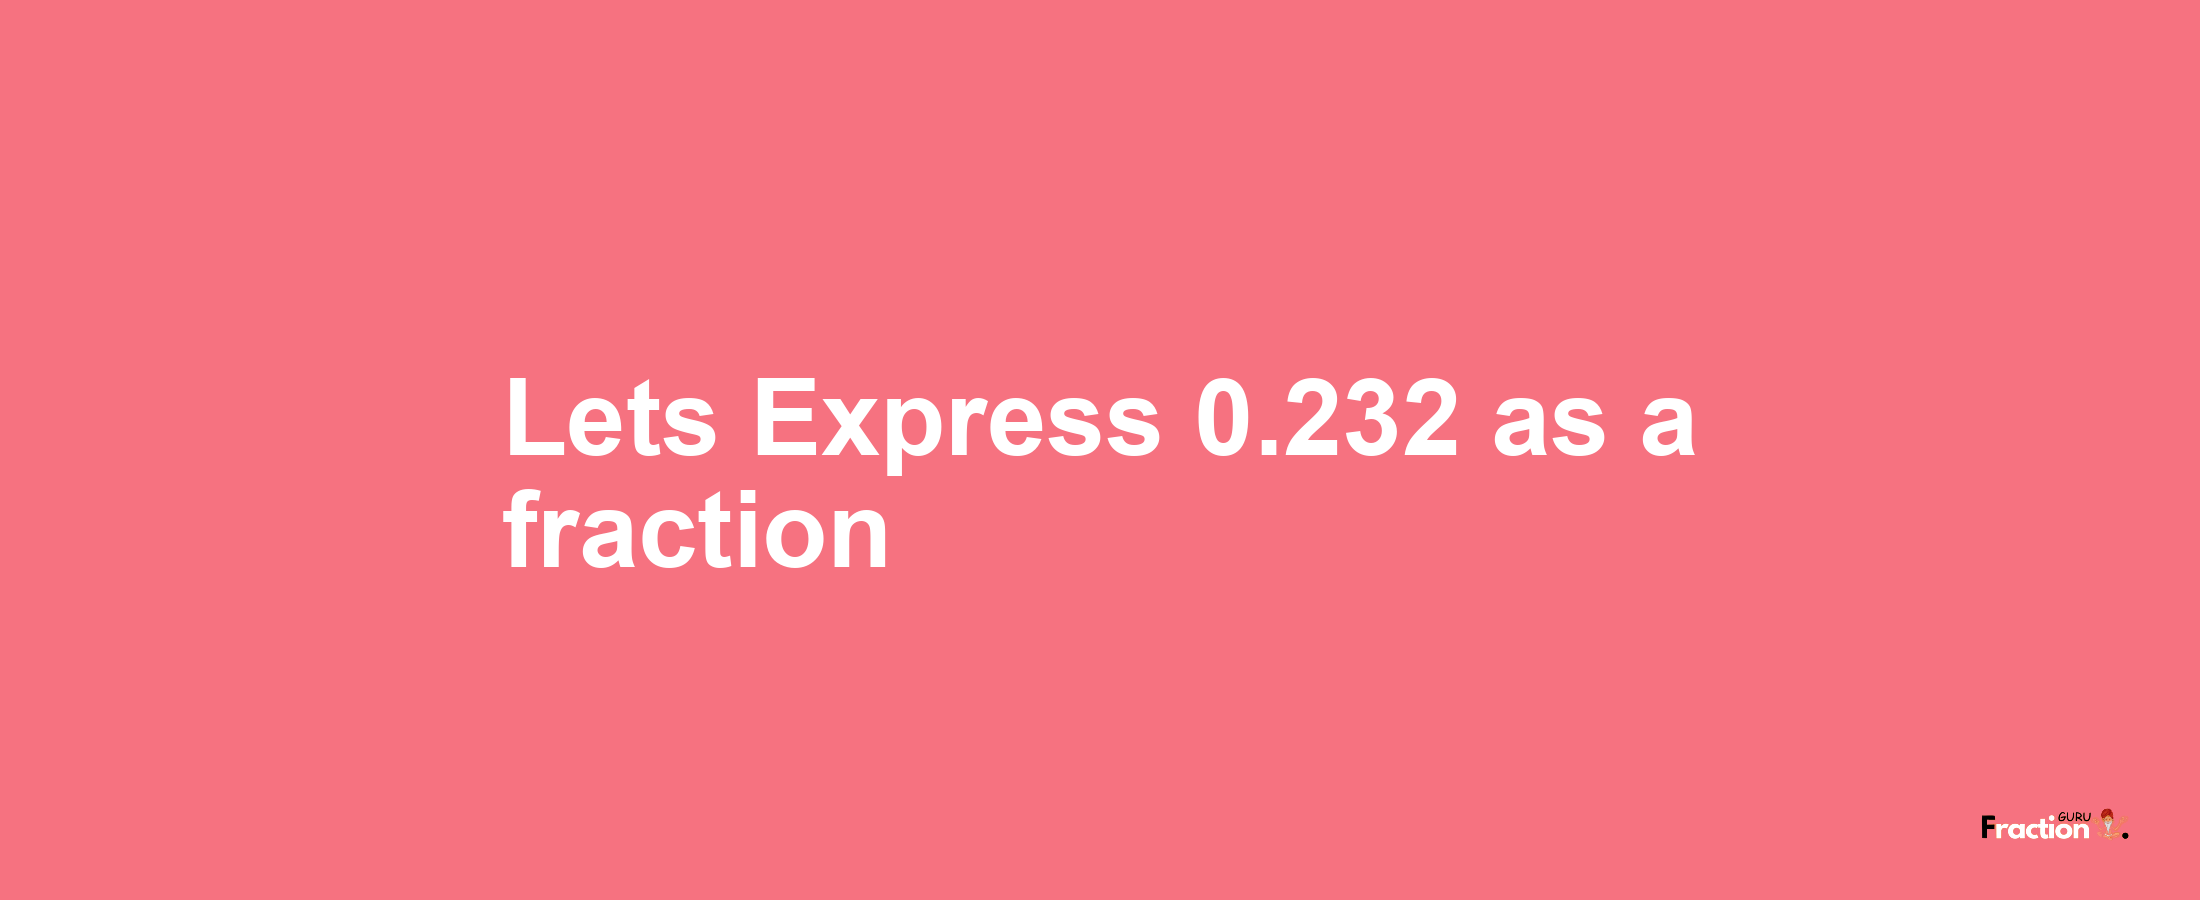 Lets Express 0.232 as afraction